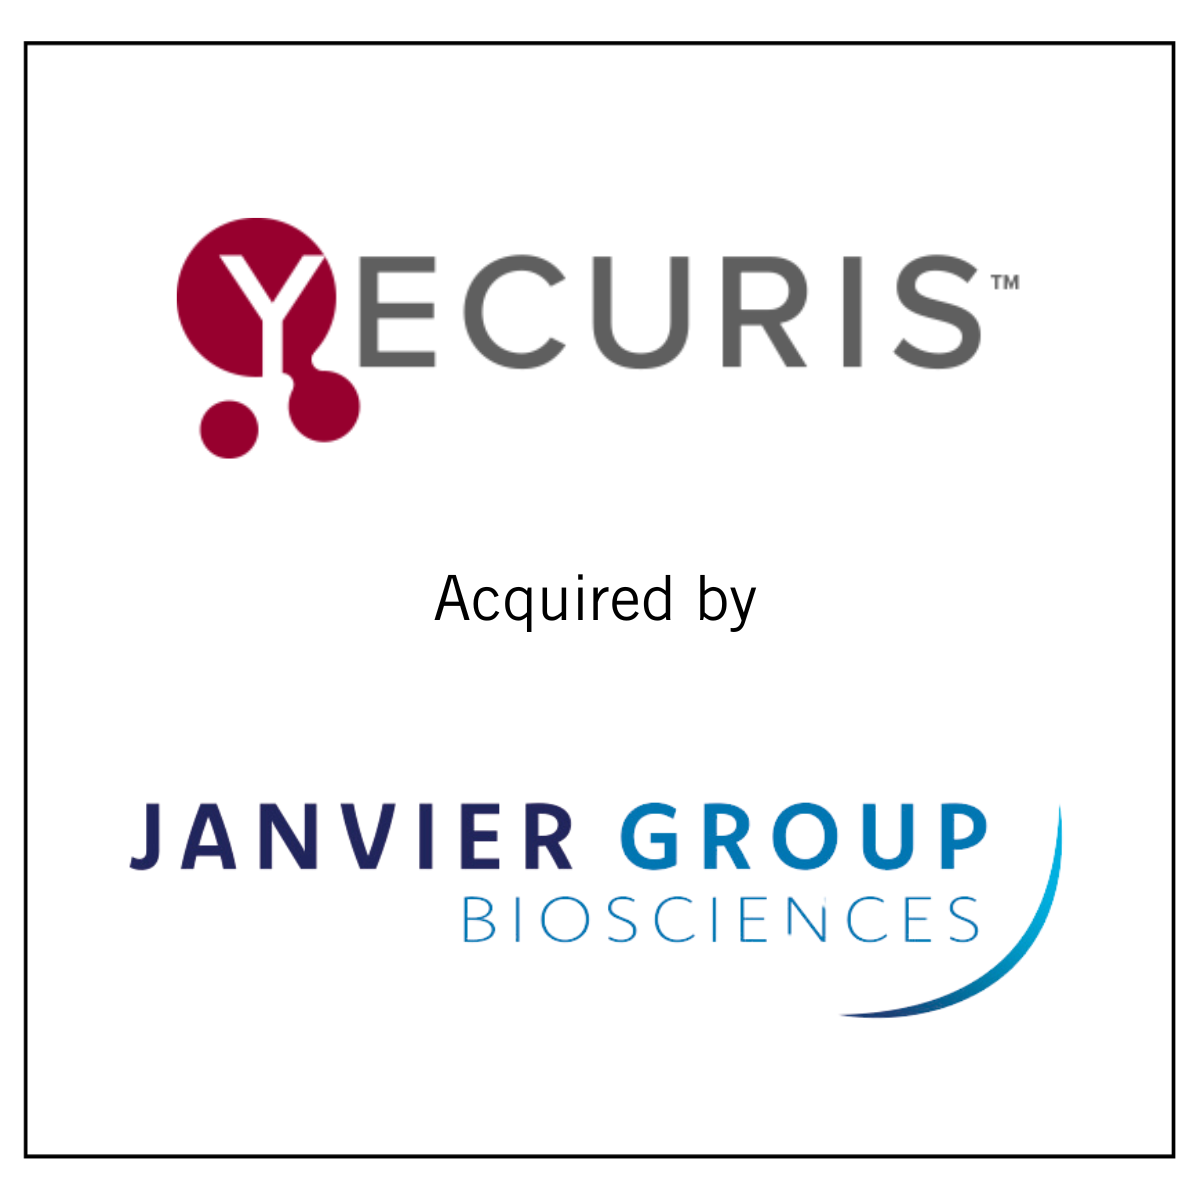 Yecuris Corporation Acquired by Janvier Group to Expand Preclinical Service Offering Internationally